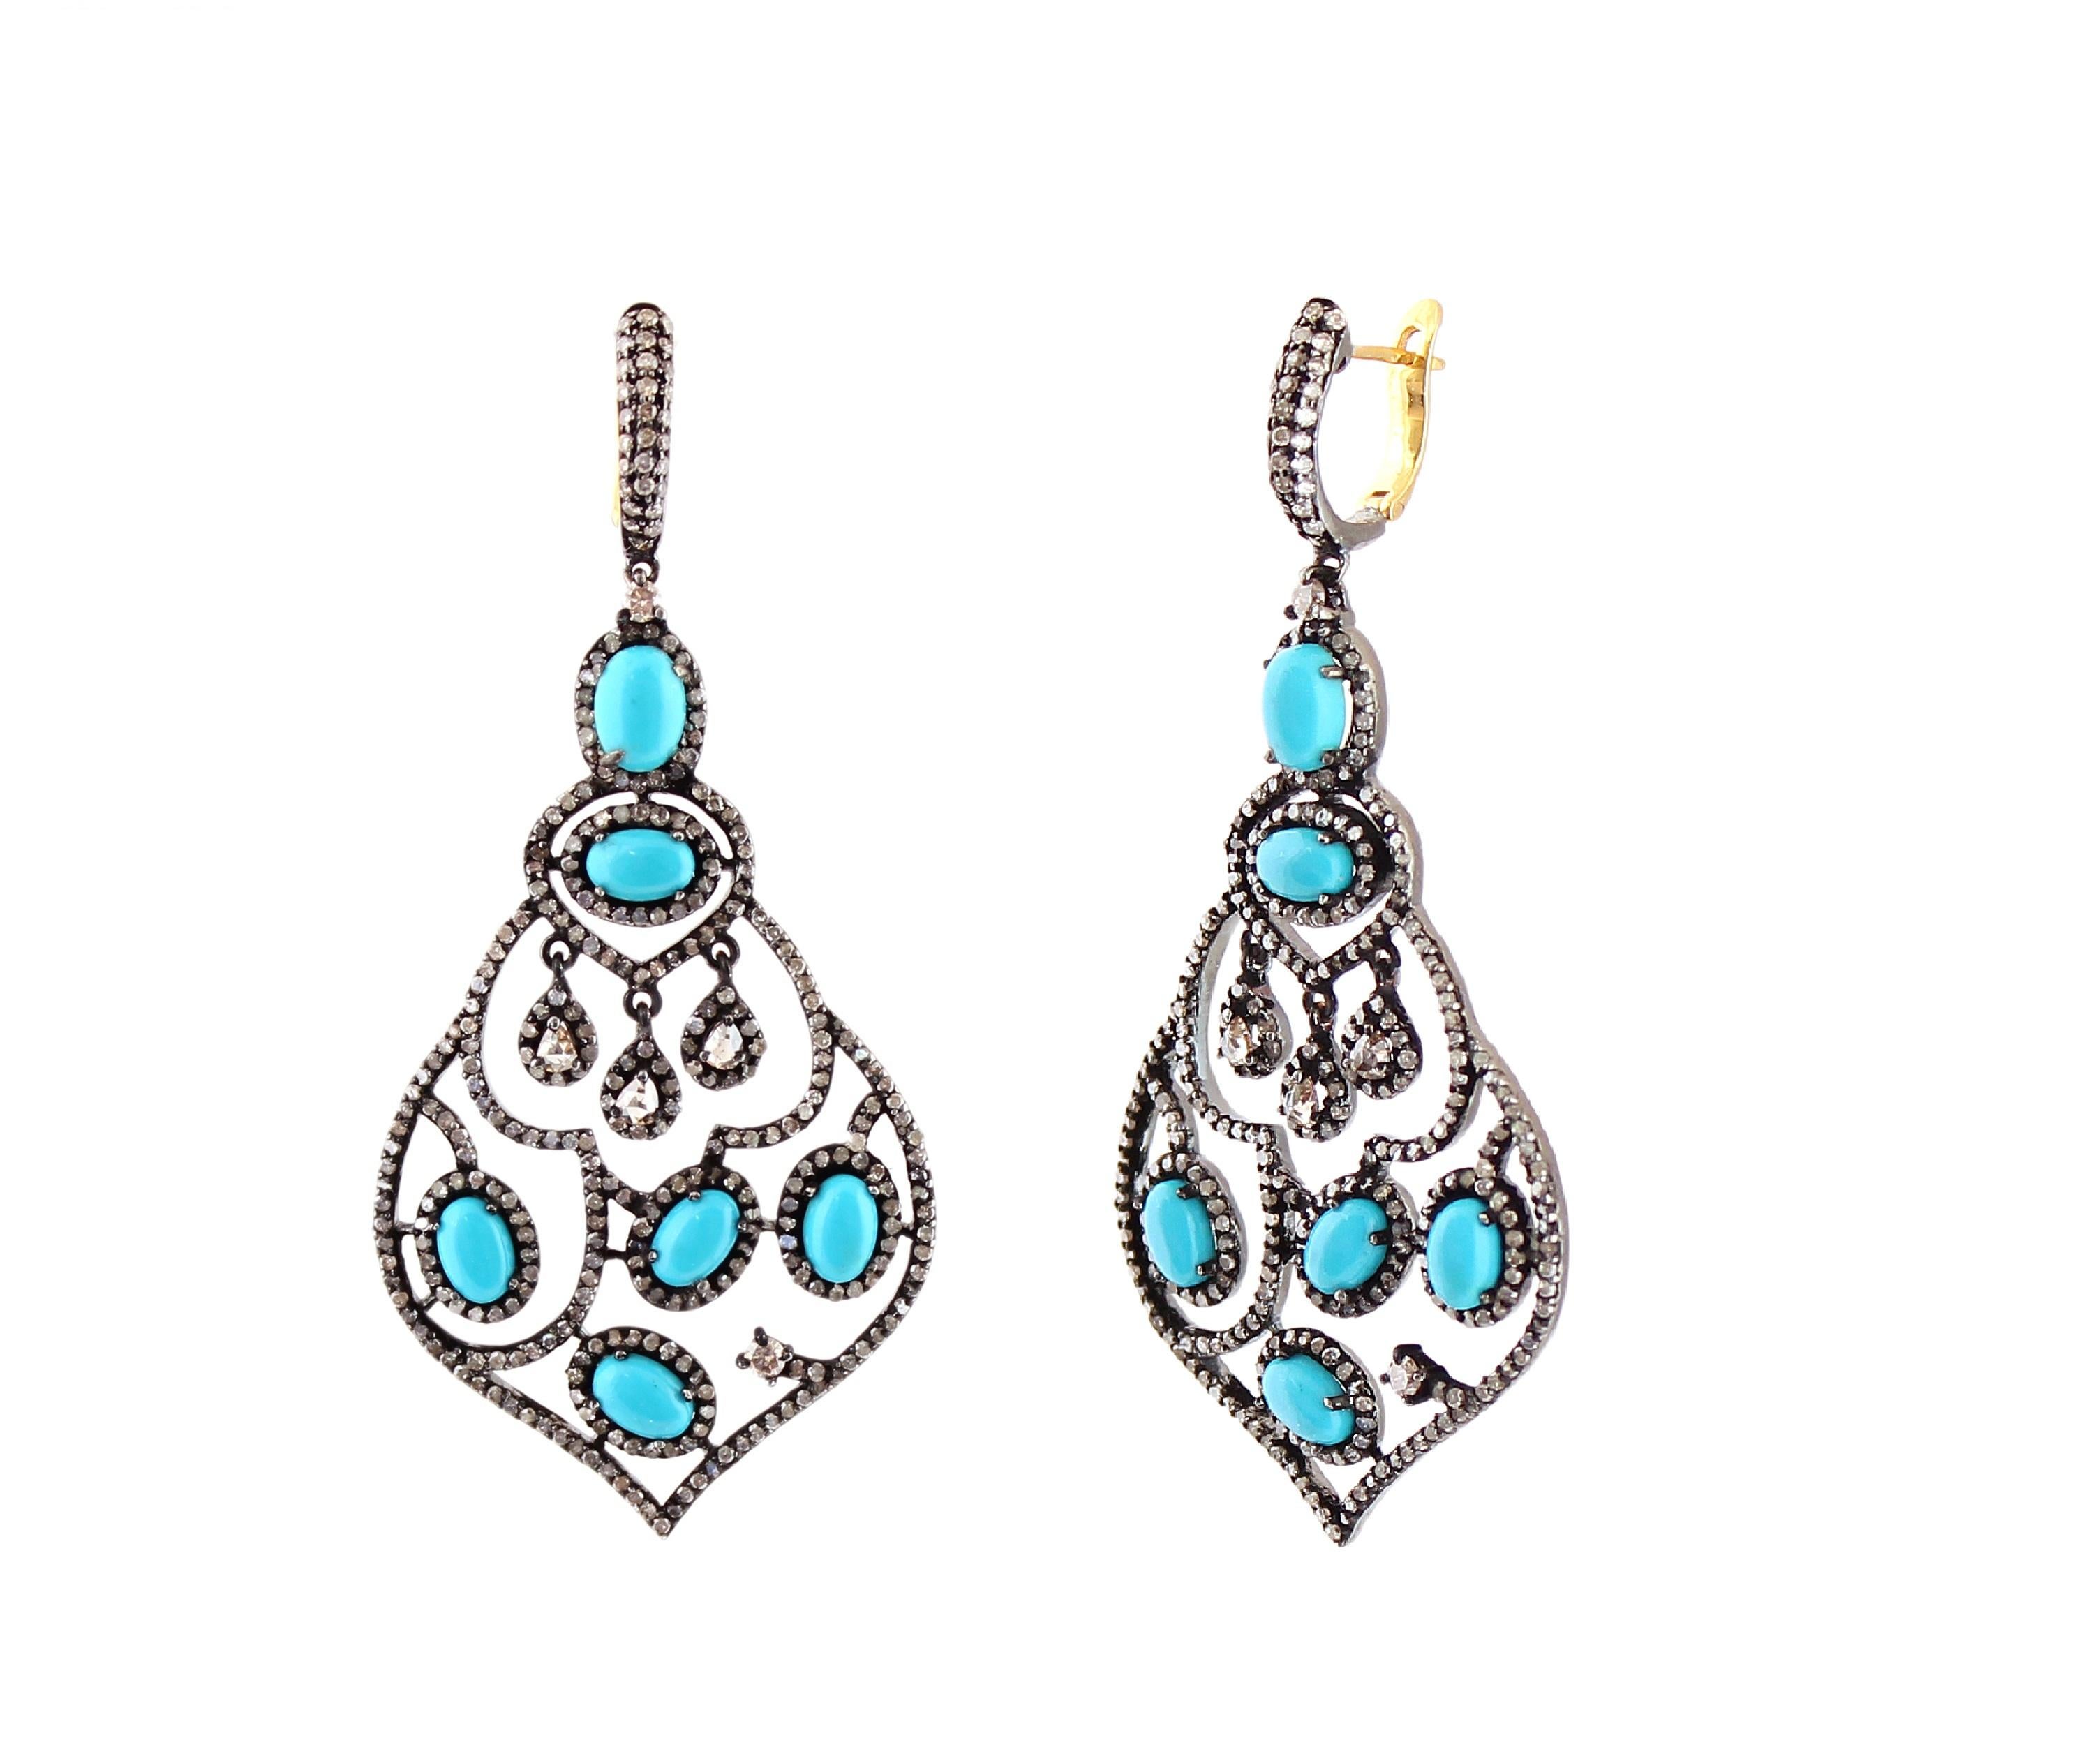 These stunning Victorian chandelier dangle earrings feature 8.51 cts. of diamonds and turquoise in 18k/925 silver. The hoop surmount is studded with diamonds and the drop beneath it, is nature-inspired with floral forms. Turquoise oval cabs 